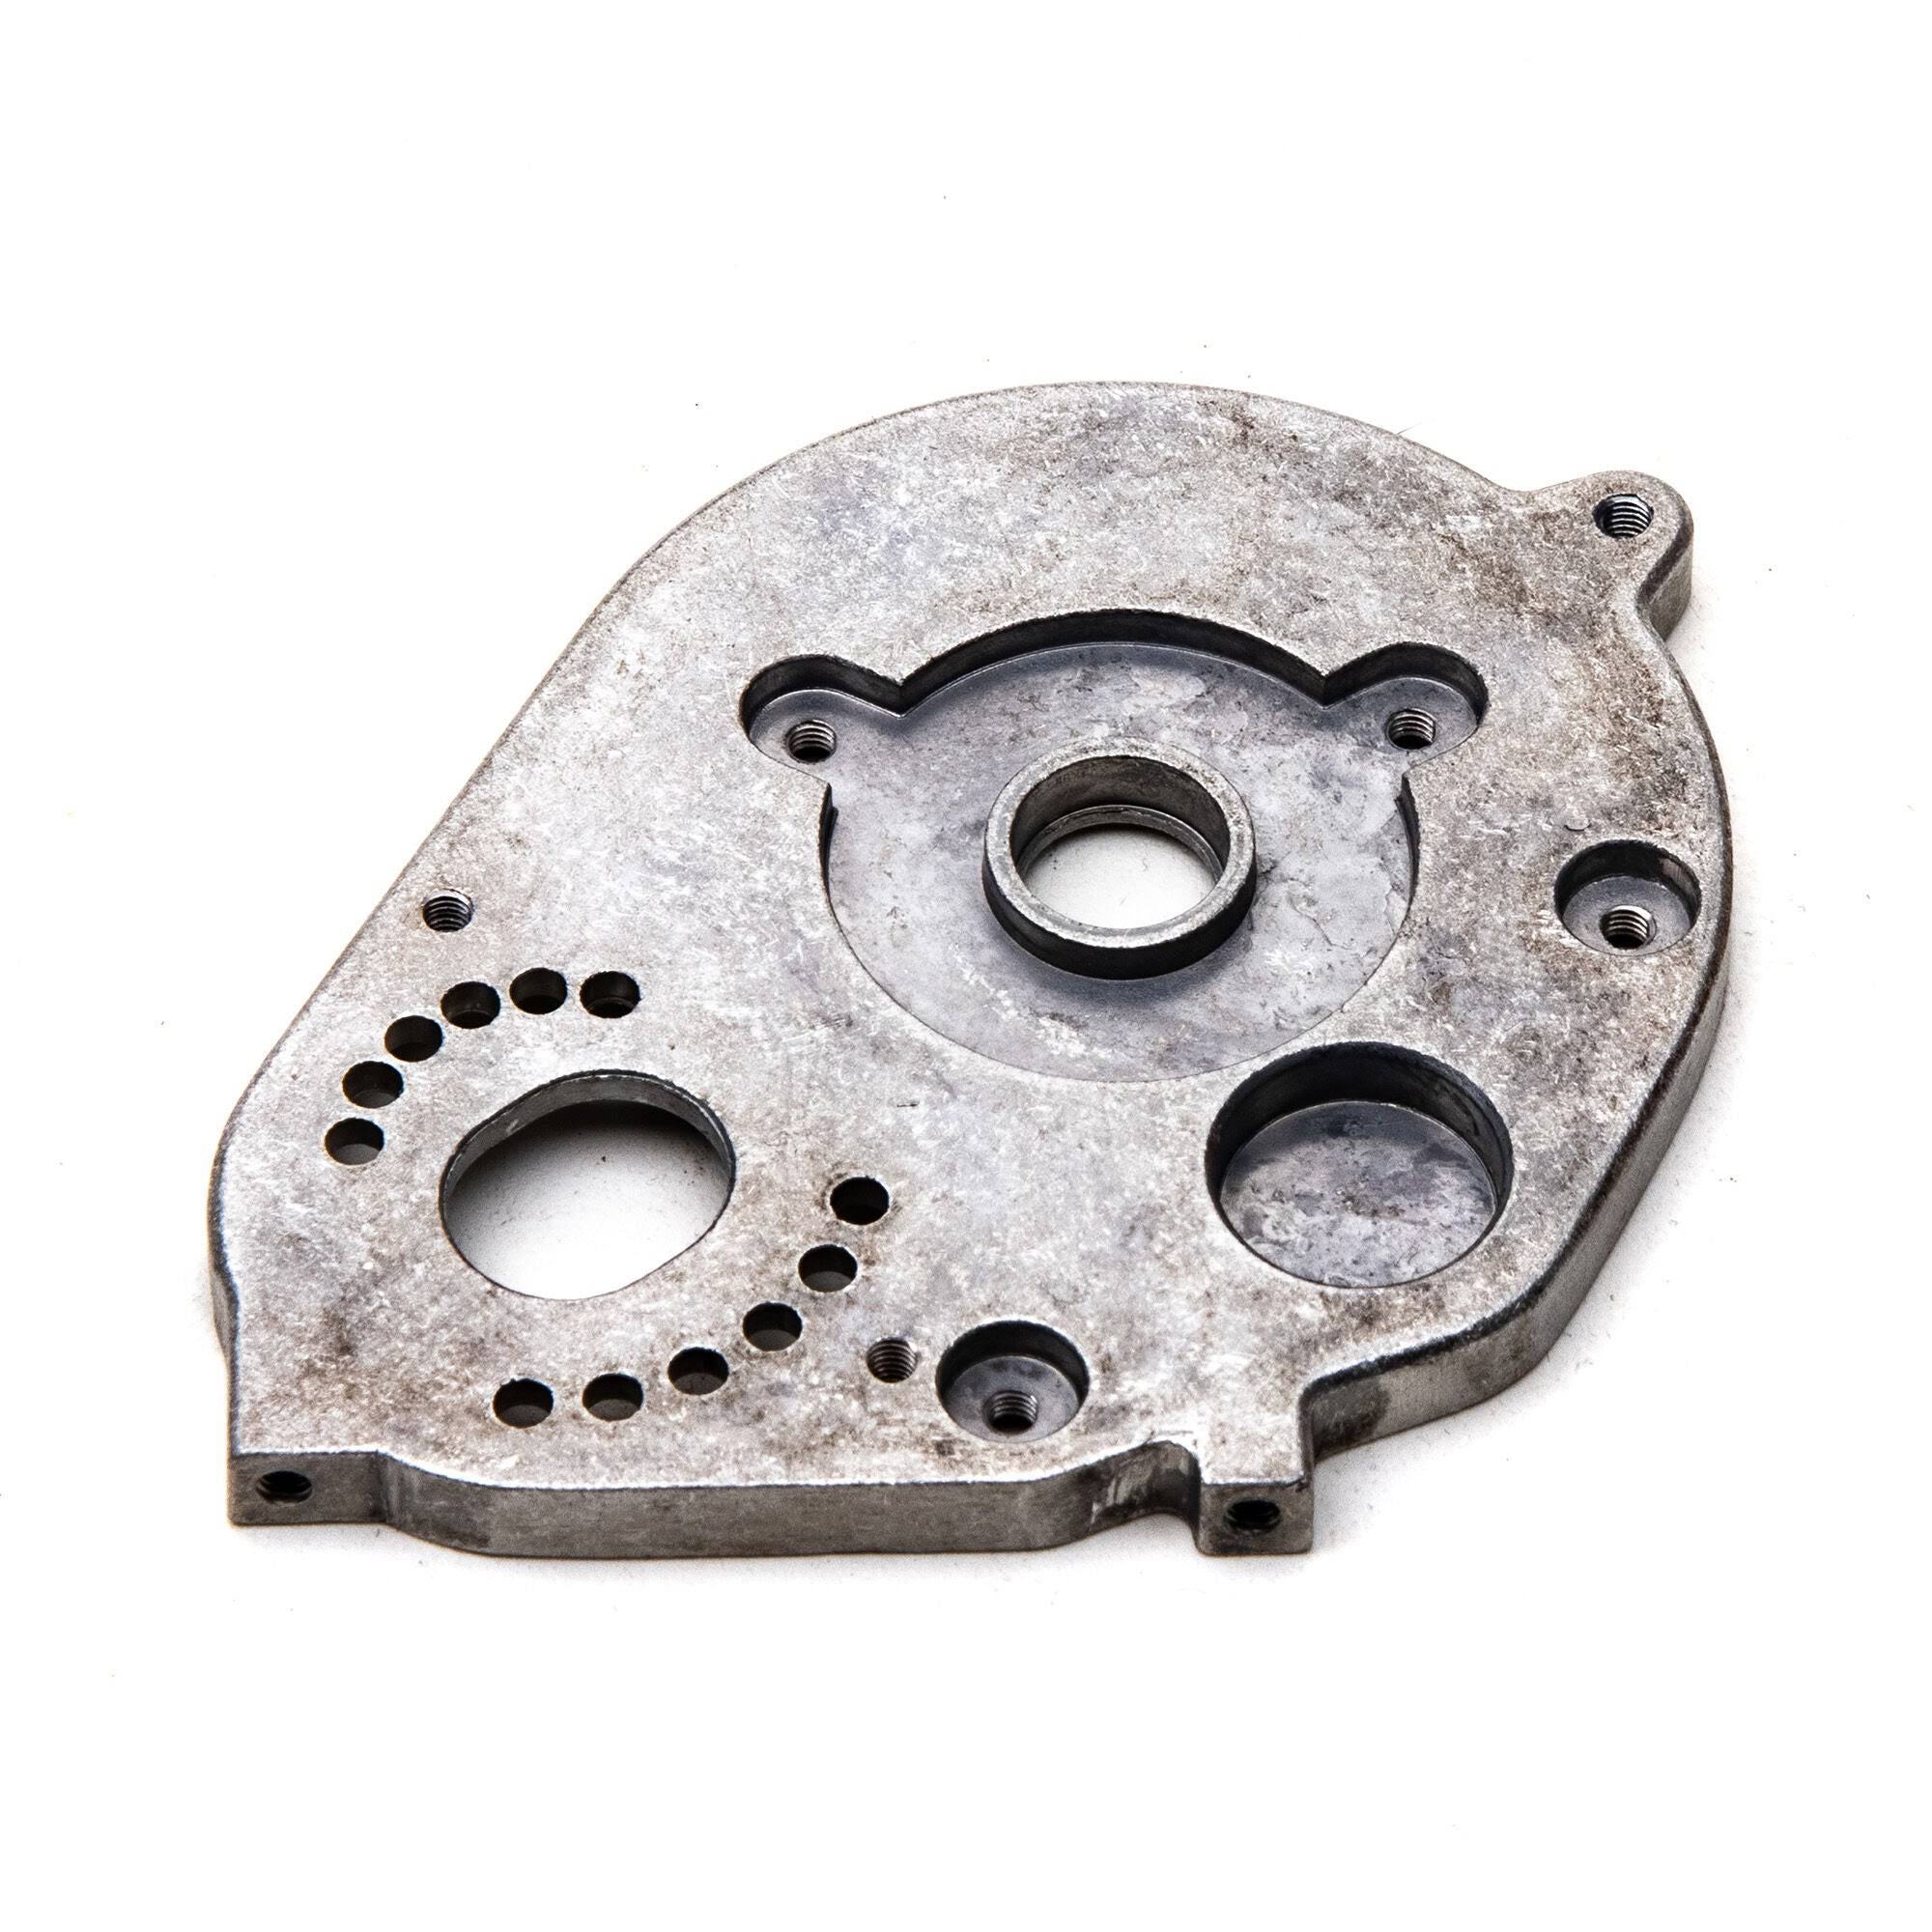 Axial AXI232056 Transmission Motor Plate Rbx10